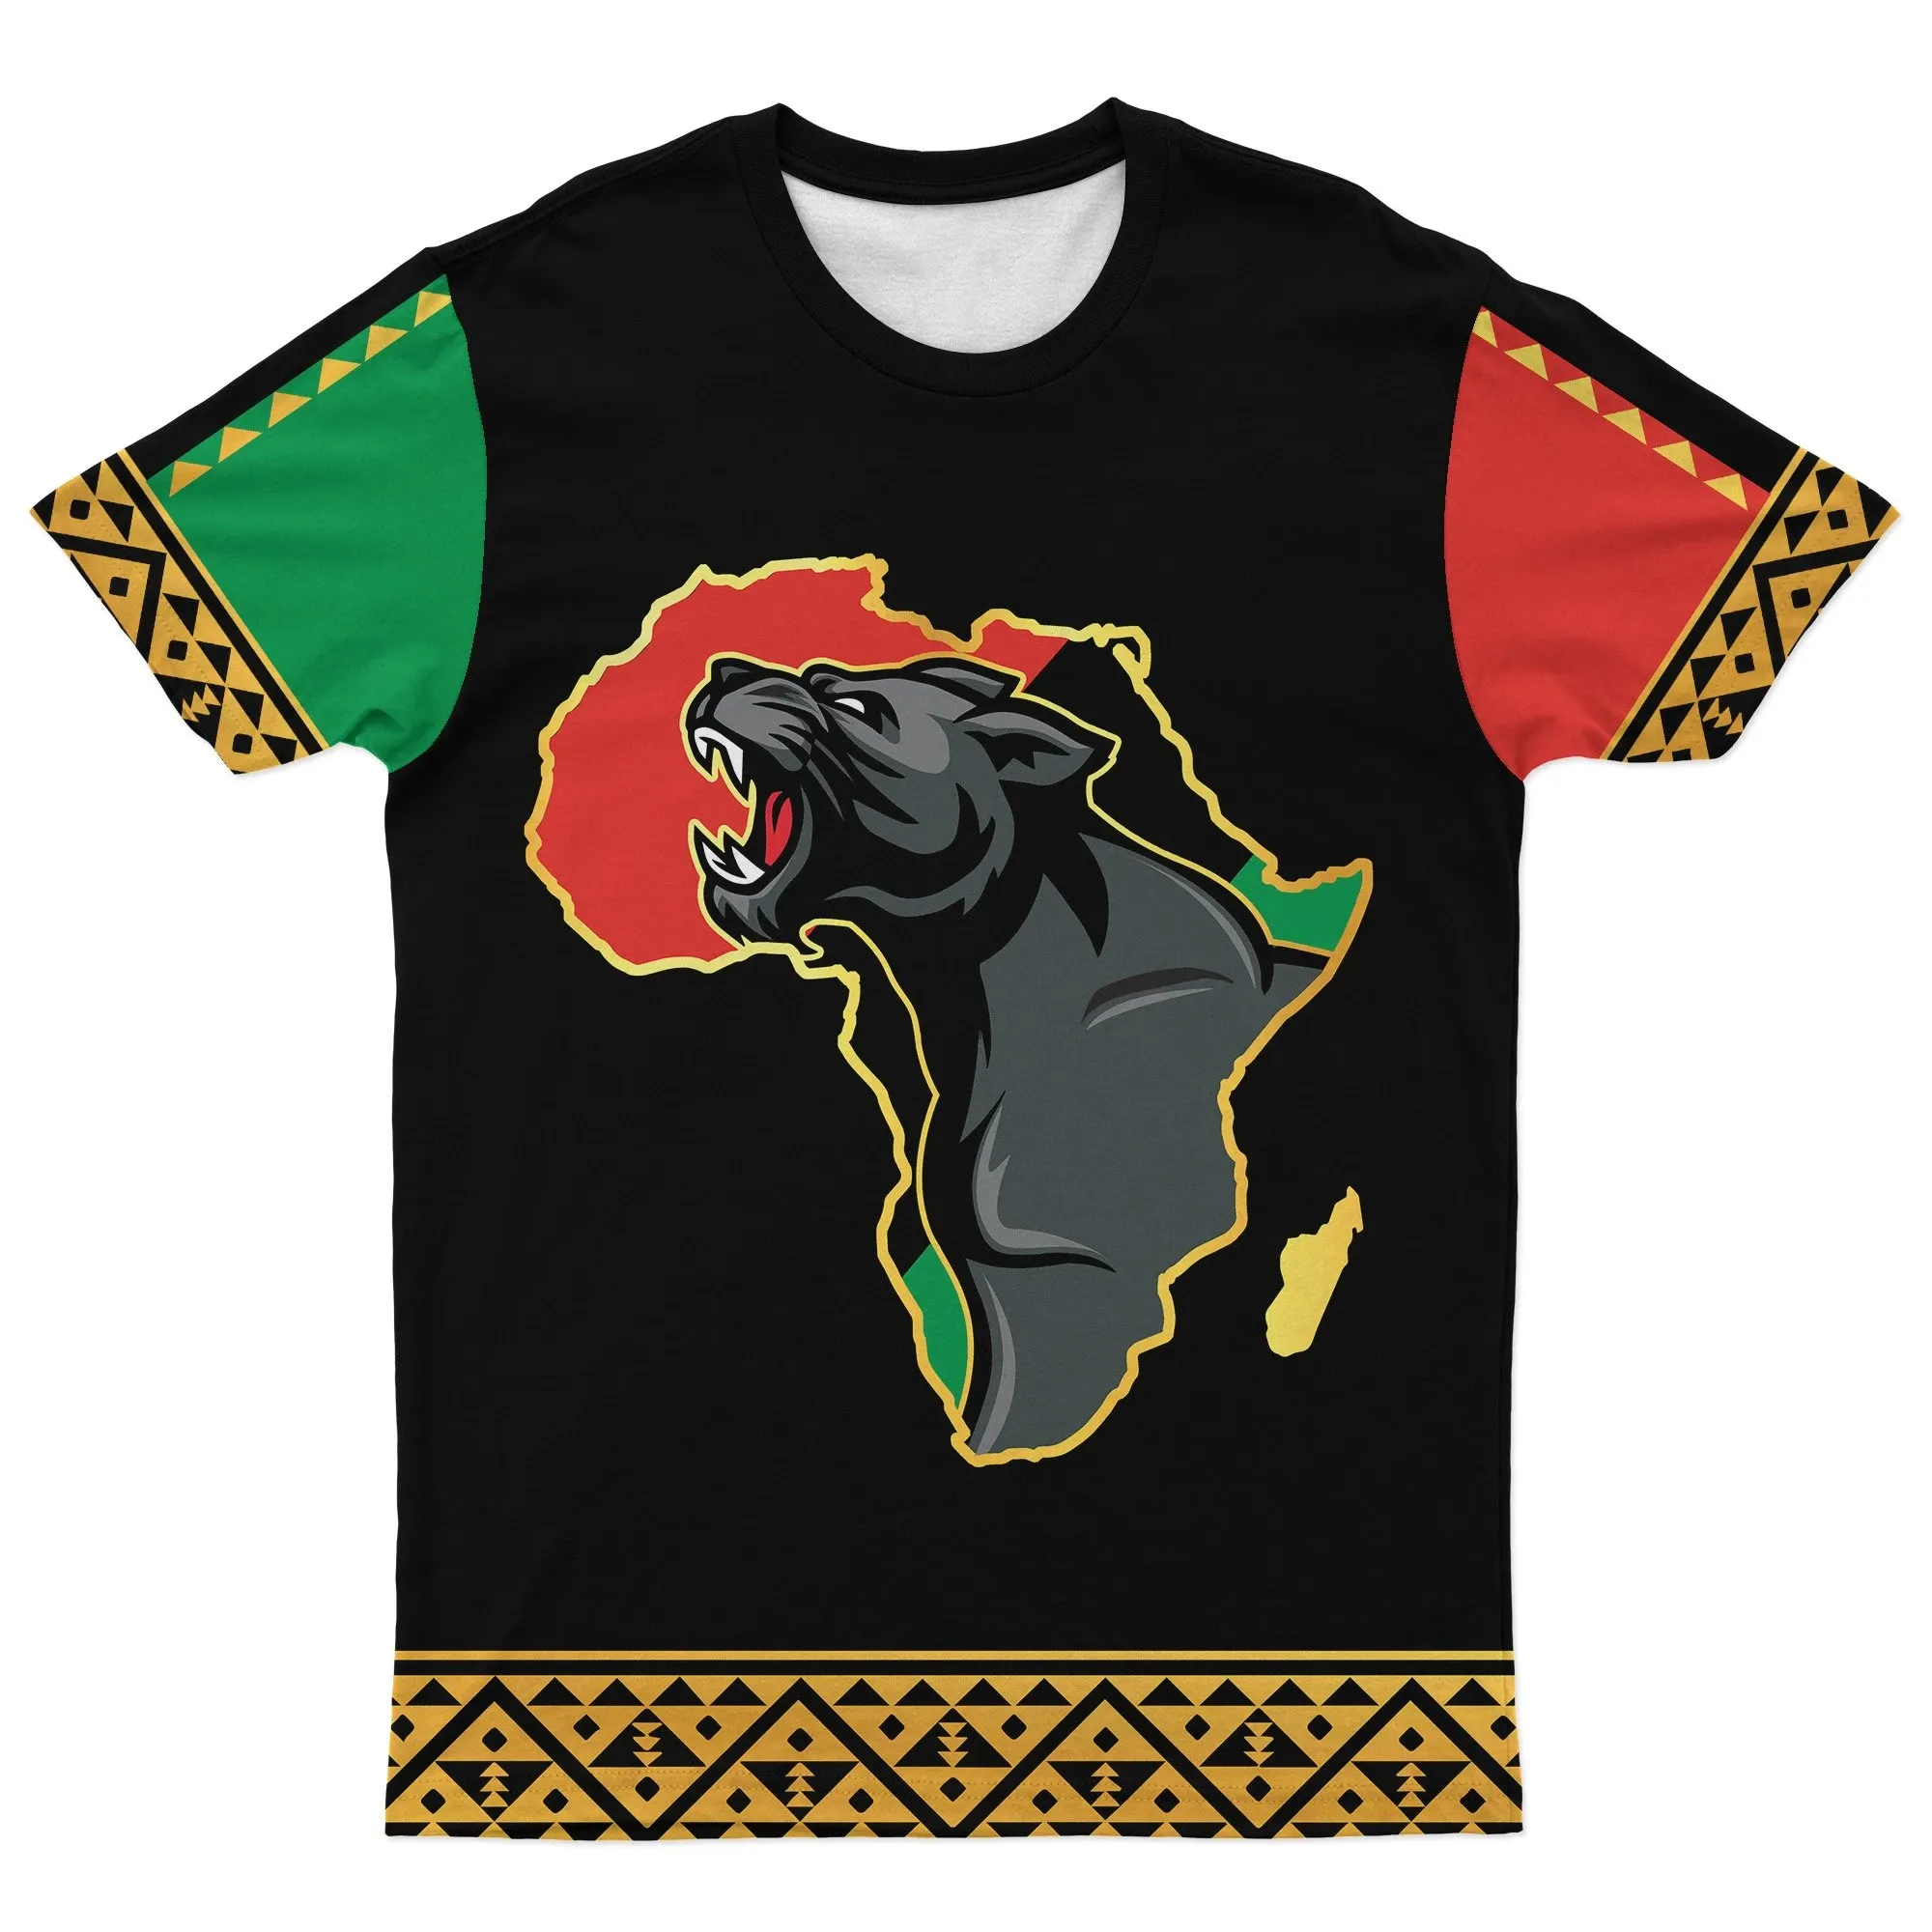 African T-shirt – Tabono Style Tee